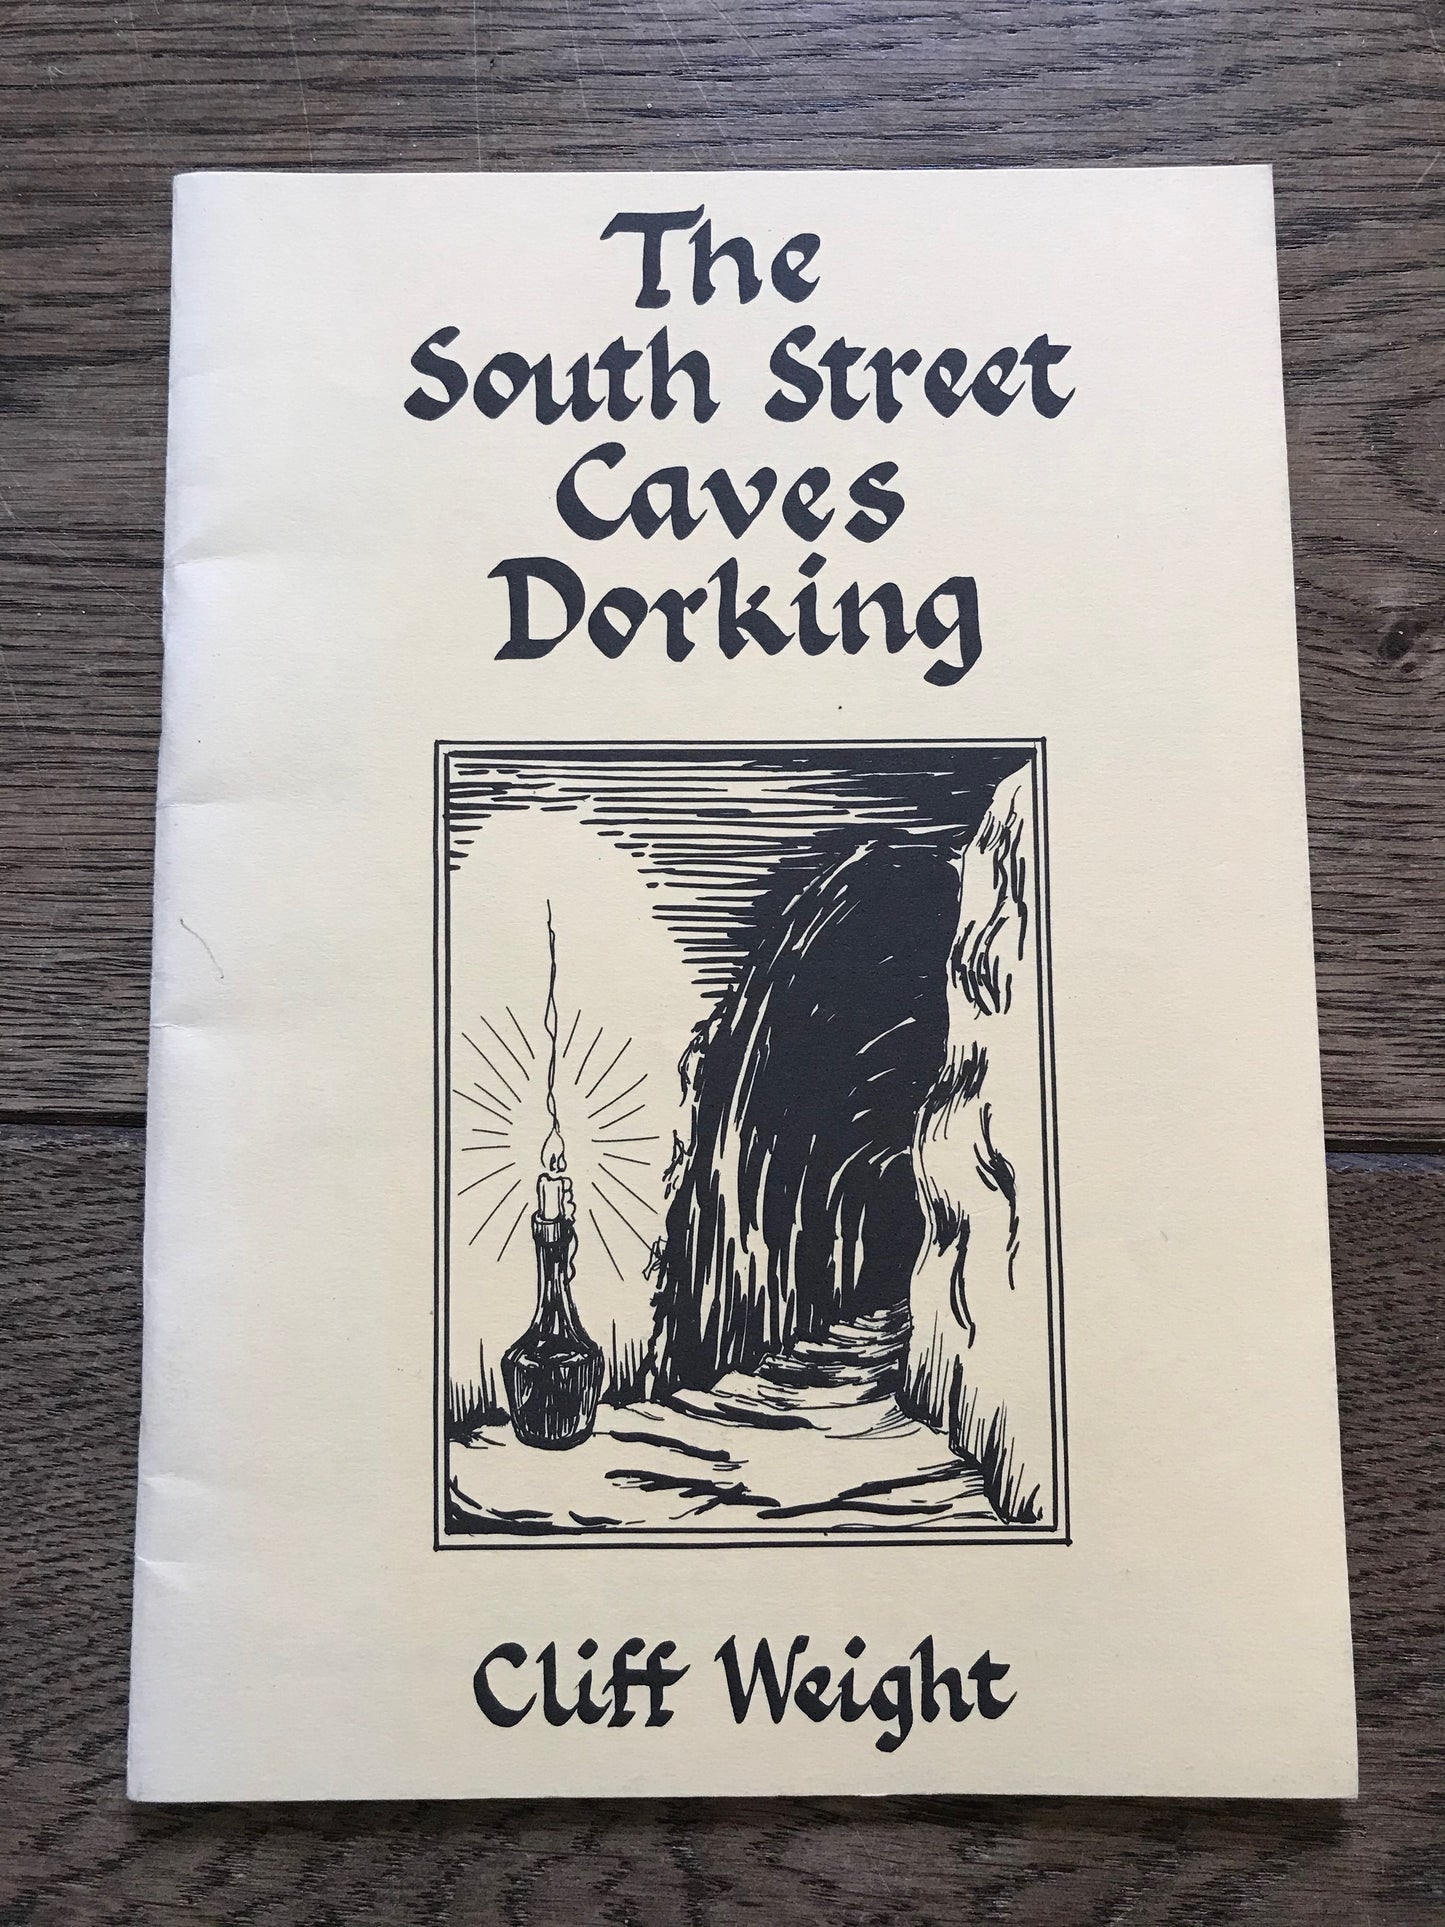 The South Street Caves, Dorking